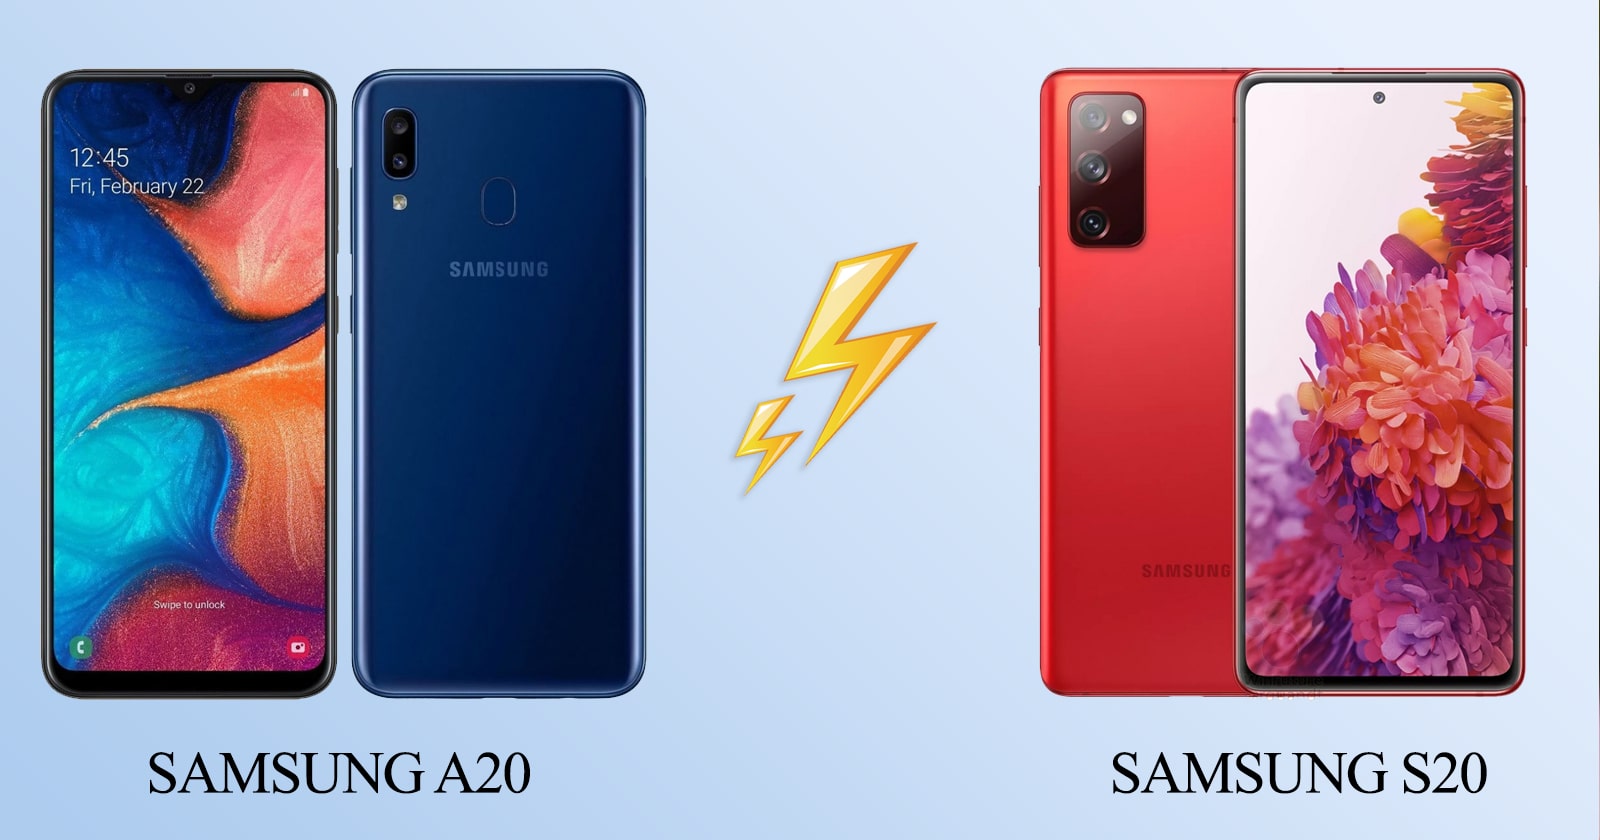 What Is the Difference Between Samsung A20 and S20